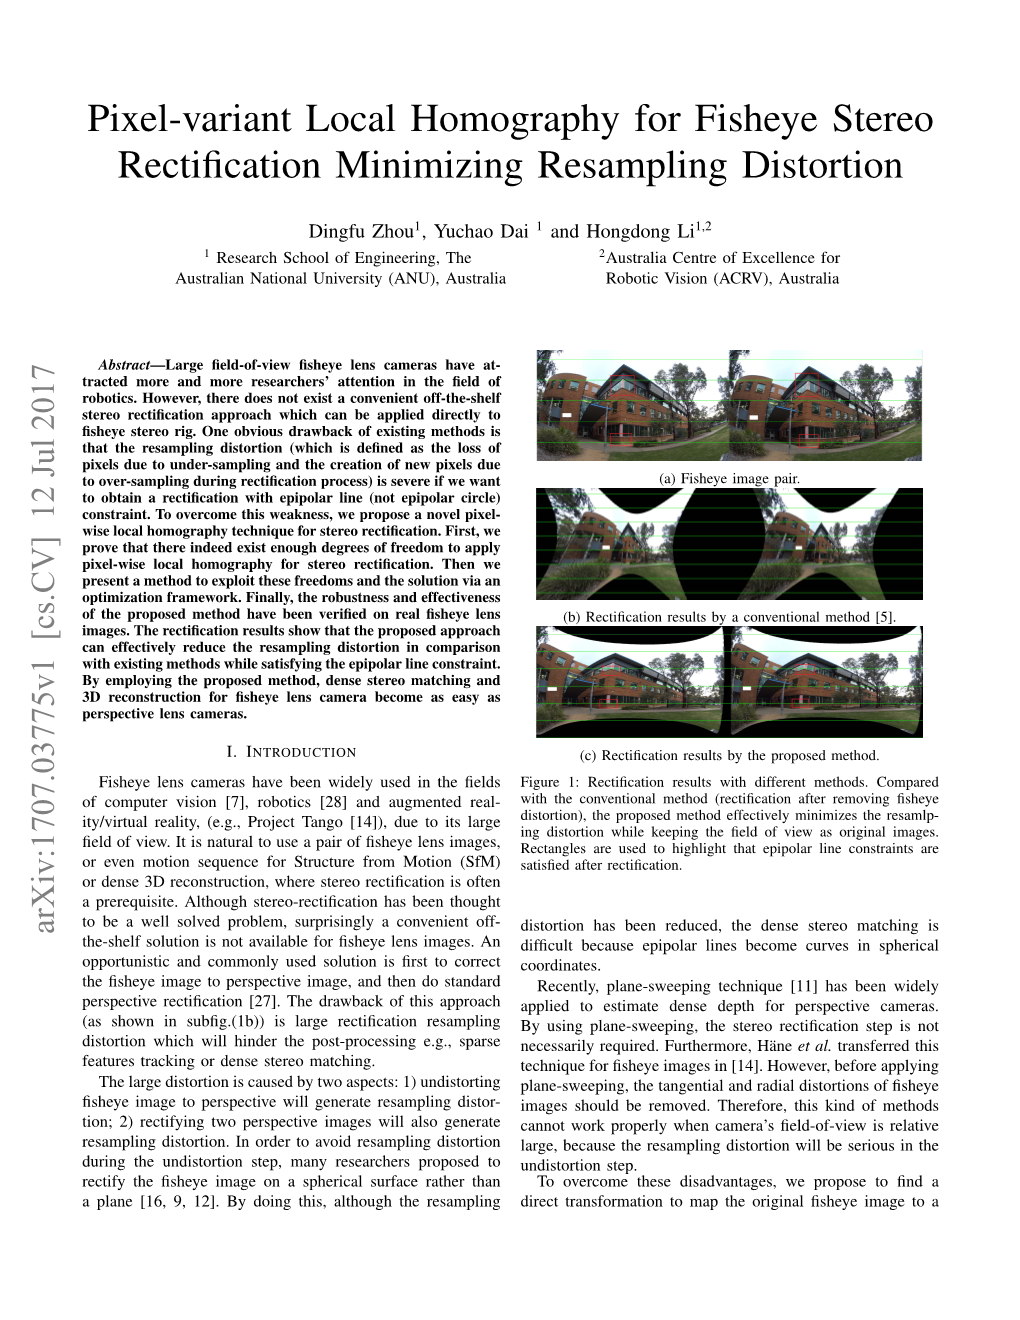 Pixel-Variant Local Homography for Fisheye Stereo Rectification Minimizing Resampling Distortion